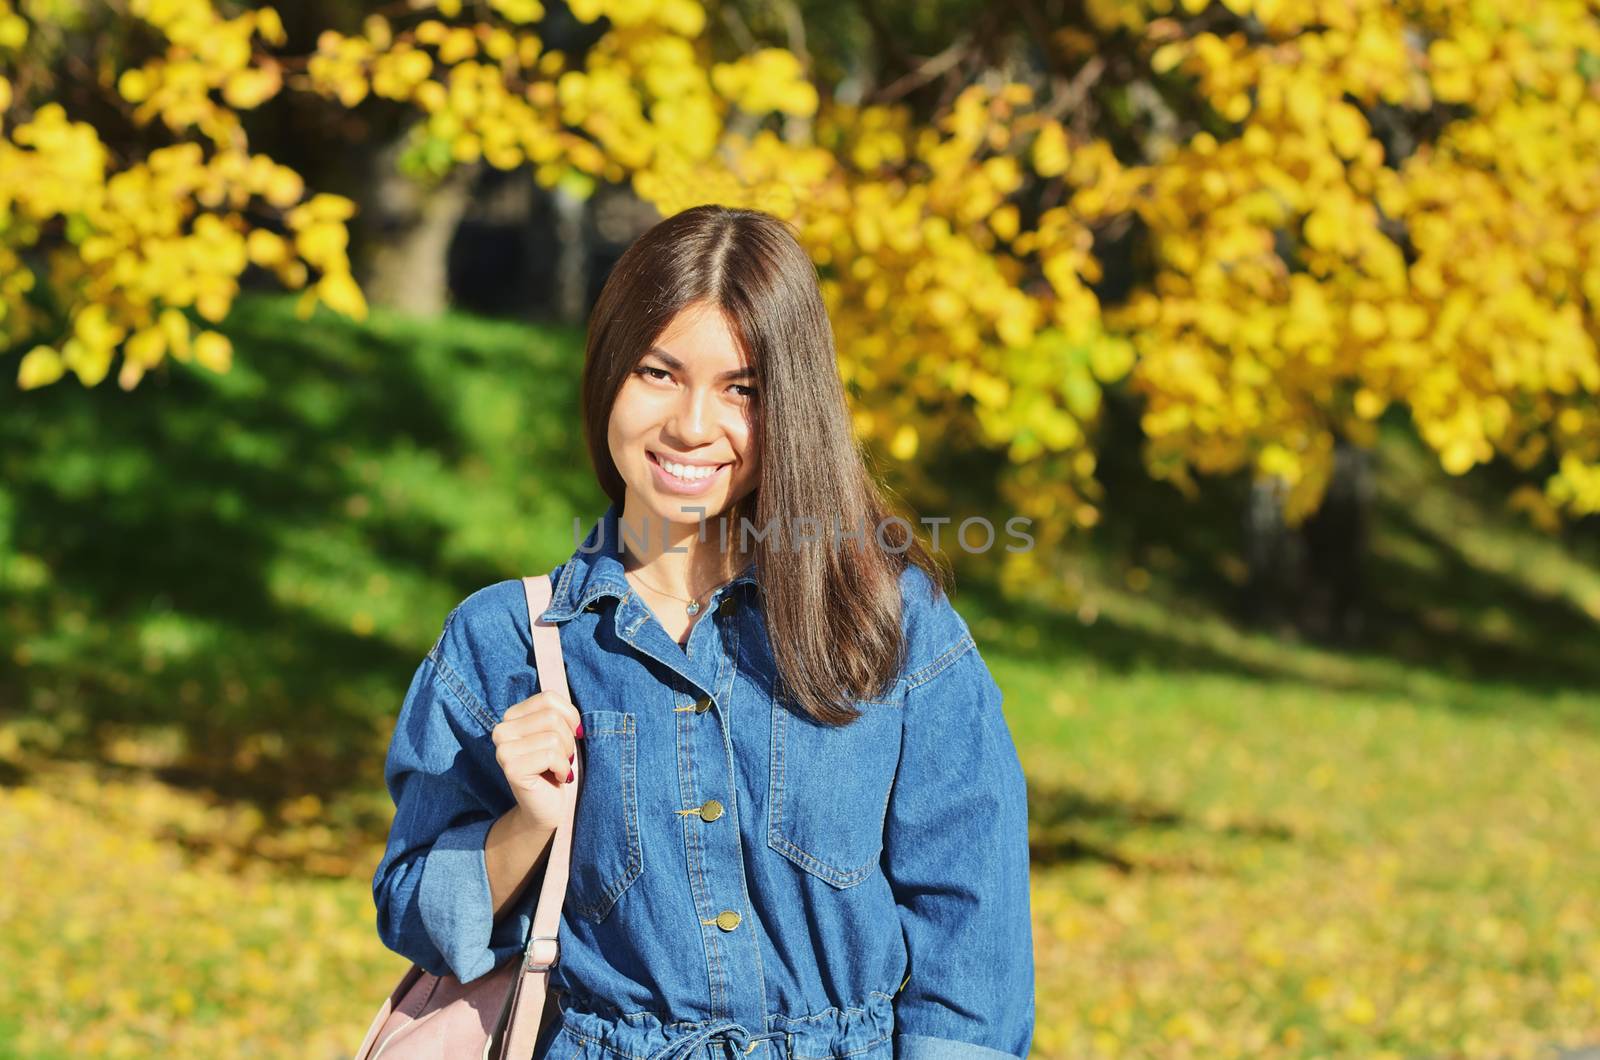 Young happy girl wearing a denim jacket walks through the autumn Park with a backpack